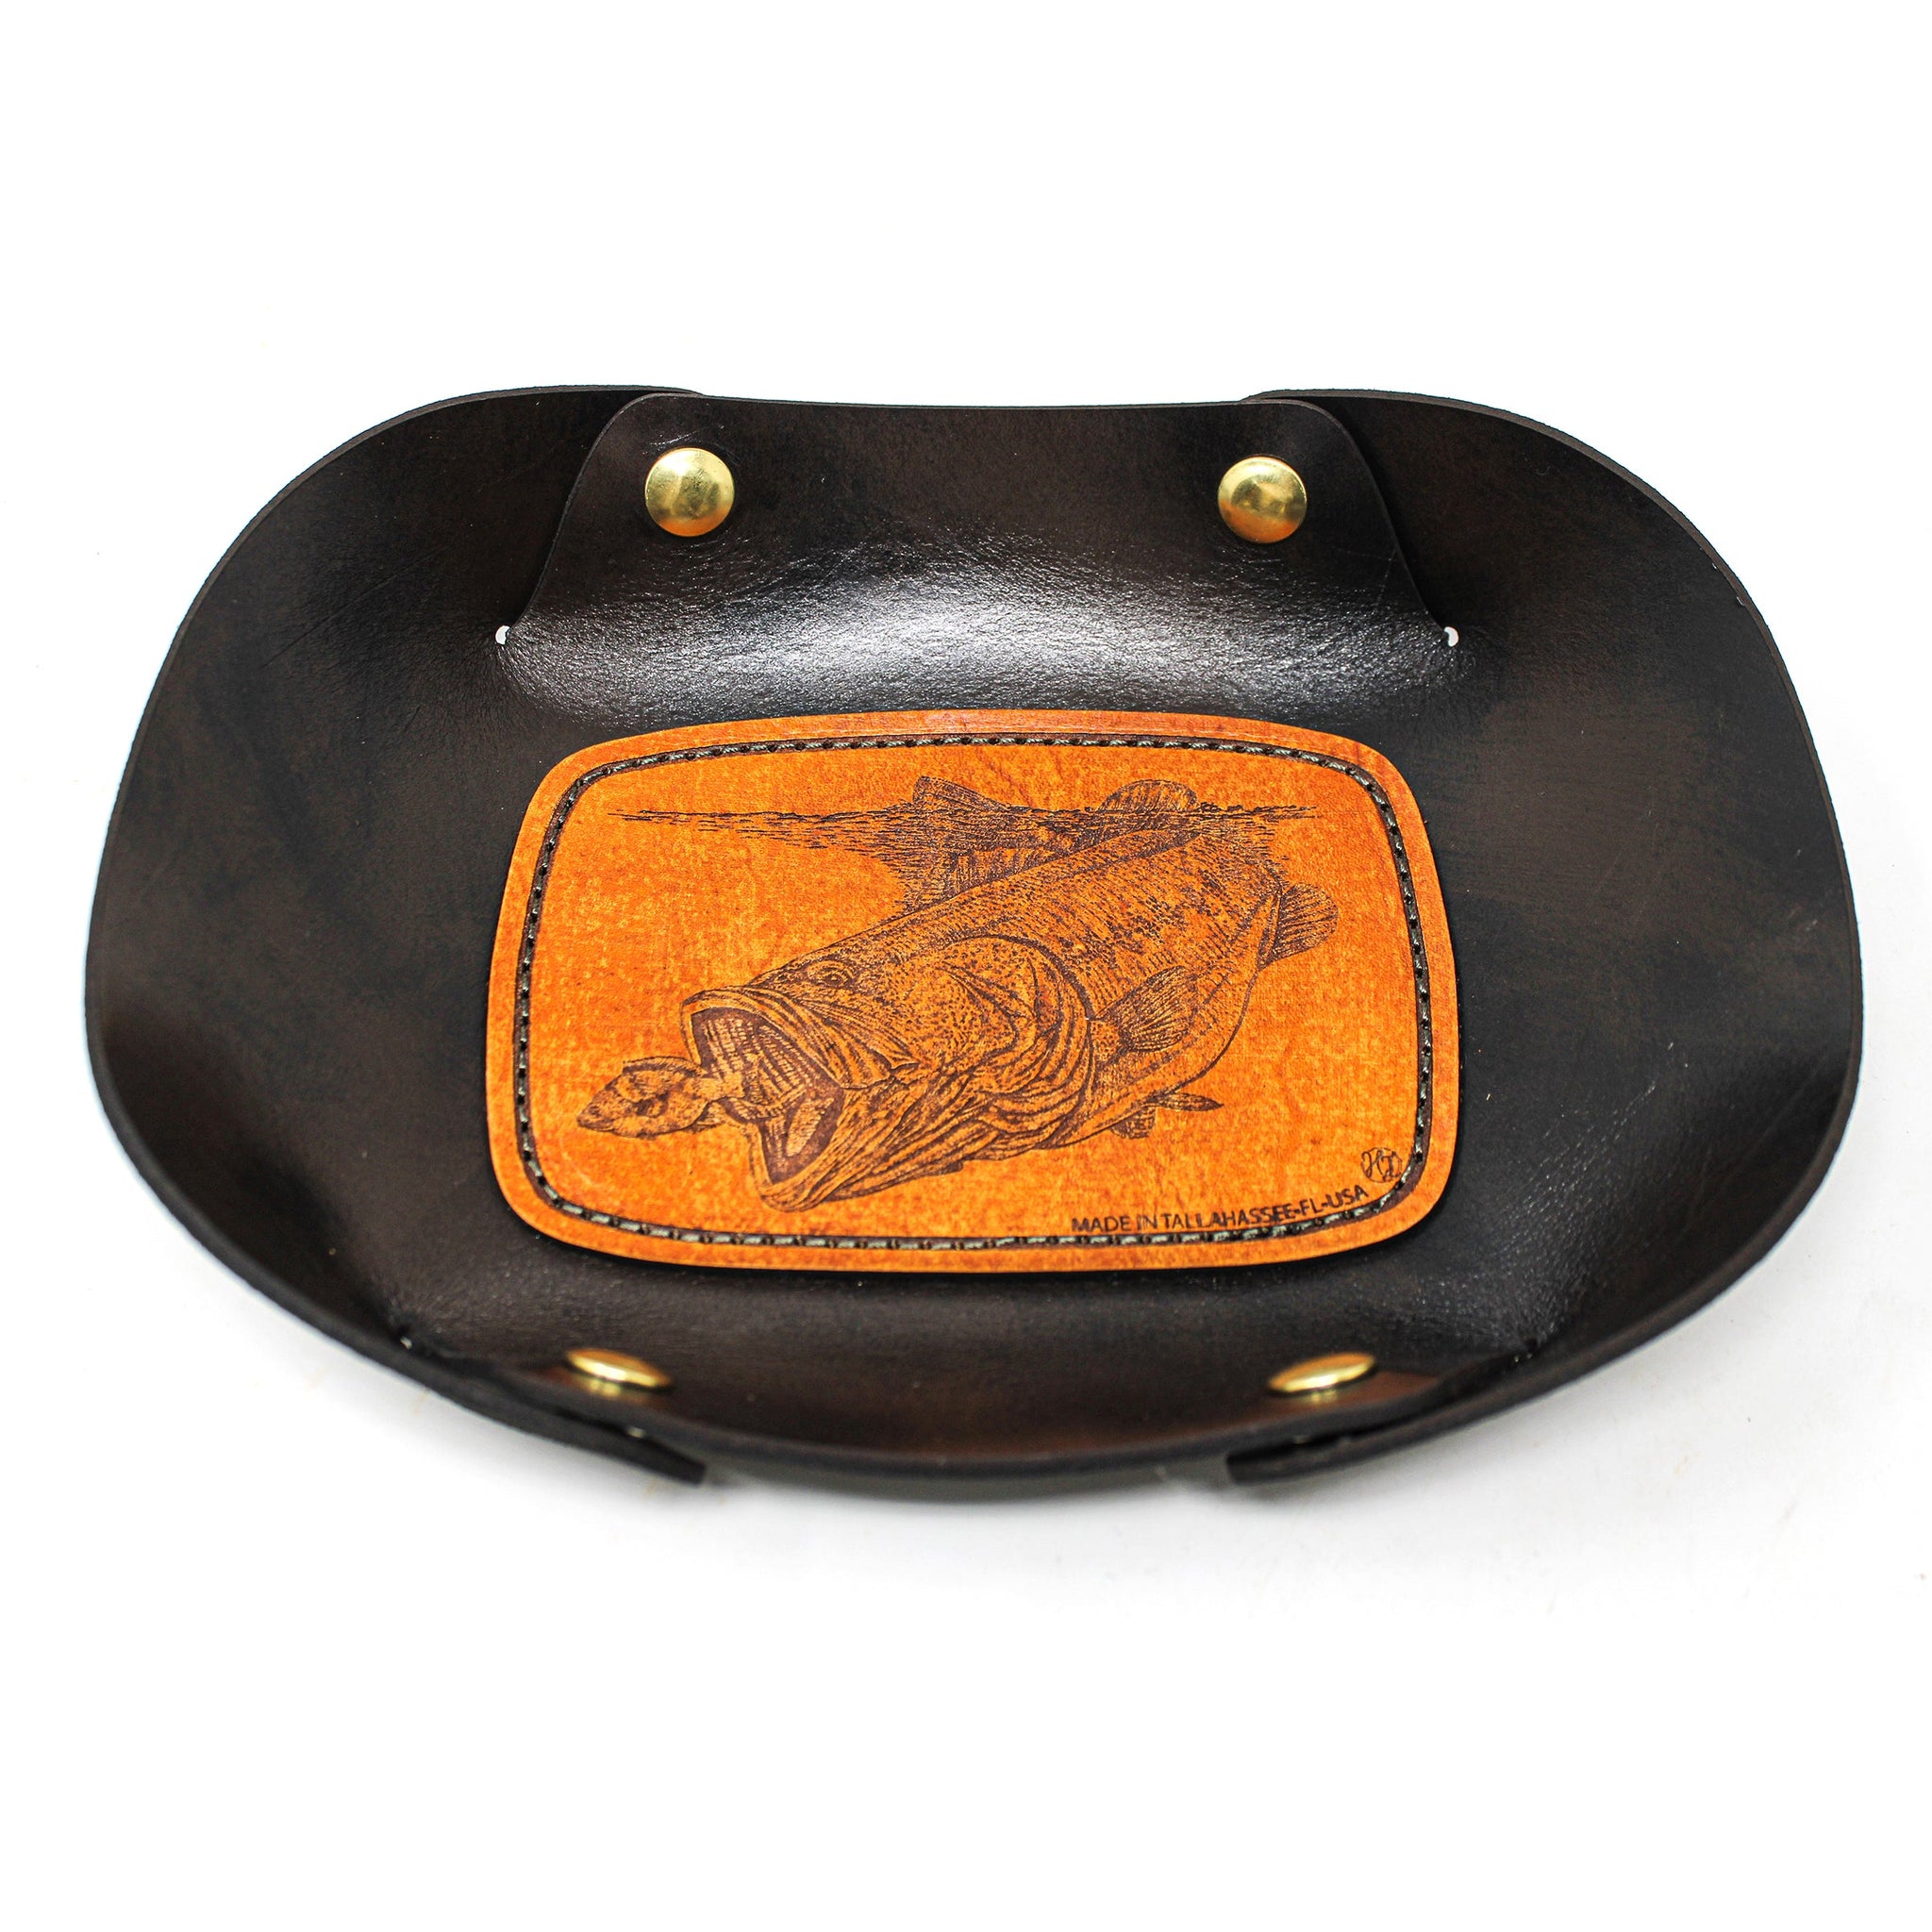 Leather Valet Tray - Large mouth bass - Get it